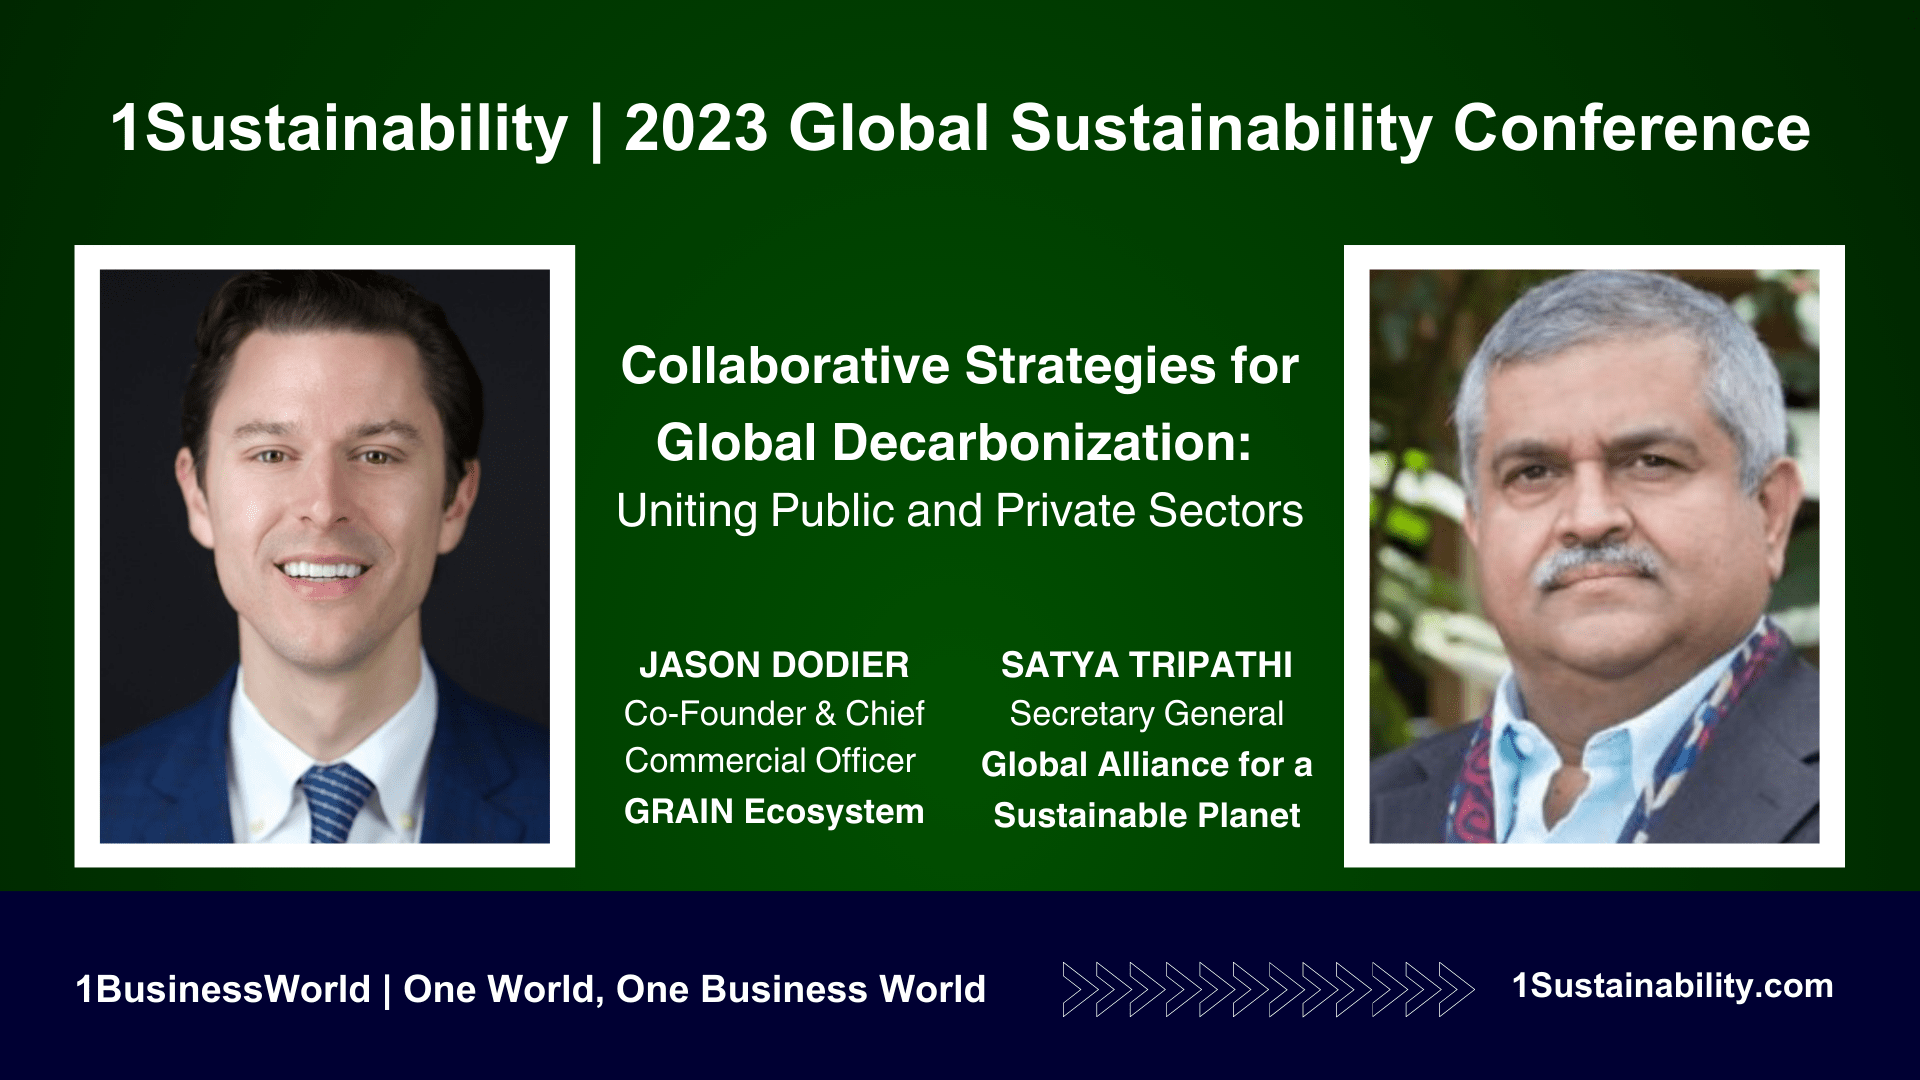 Collaborative Strategies for Global Decarbonization: Uniting Public and Private Sectors | Jason Dodier & Satya Tripathi